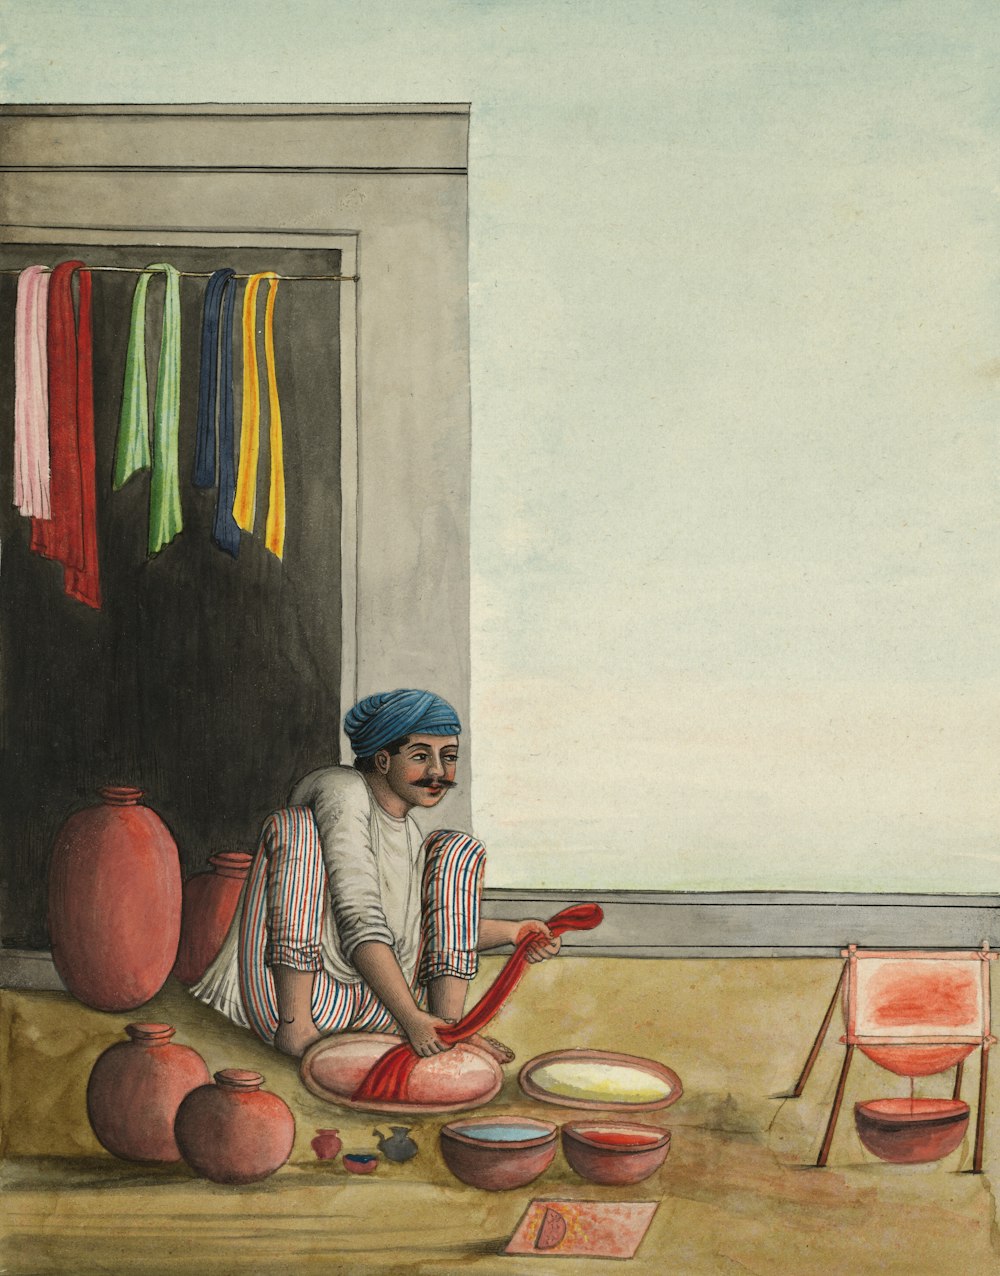 a painting of a man sitting in front of a window